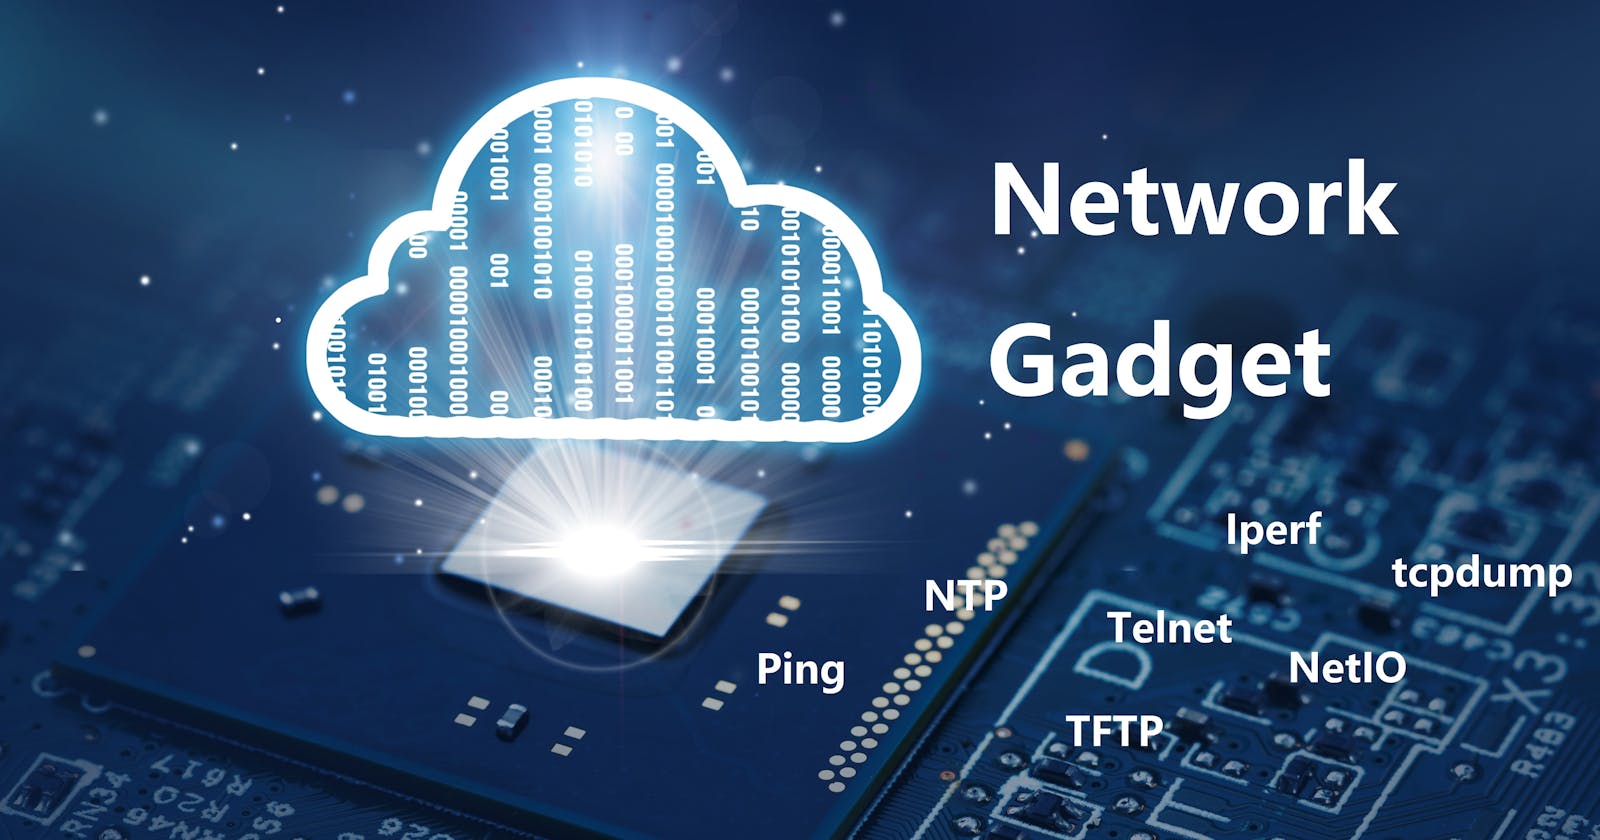 An Easy-to-use Network Gadgets Contains Ping, NTP, TFTP, Iperf, and more!